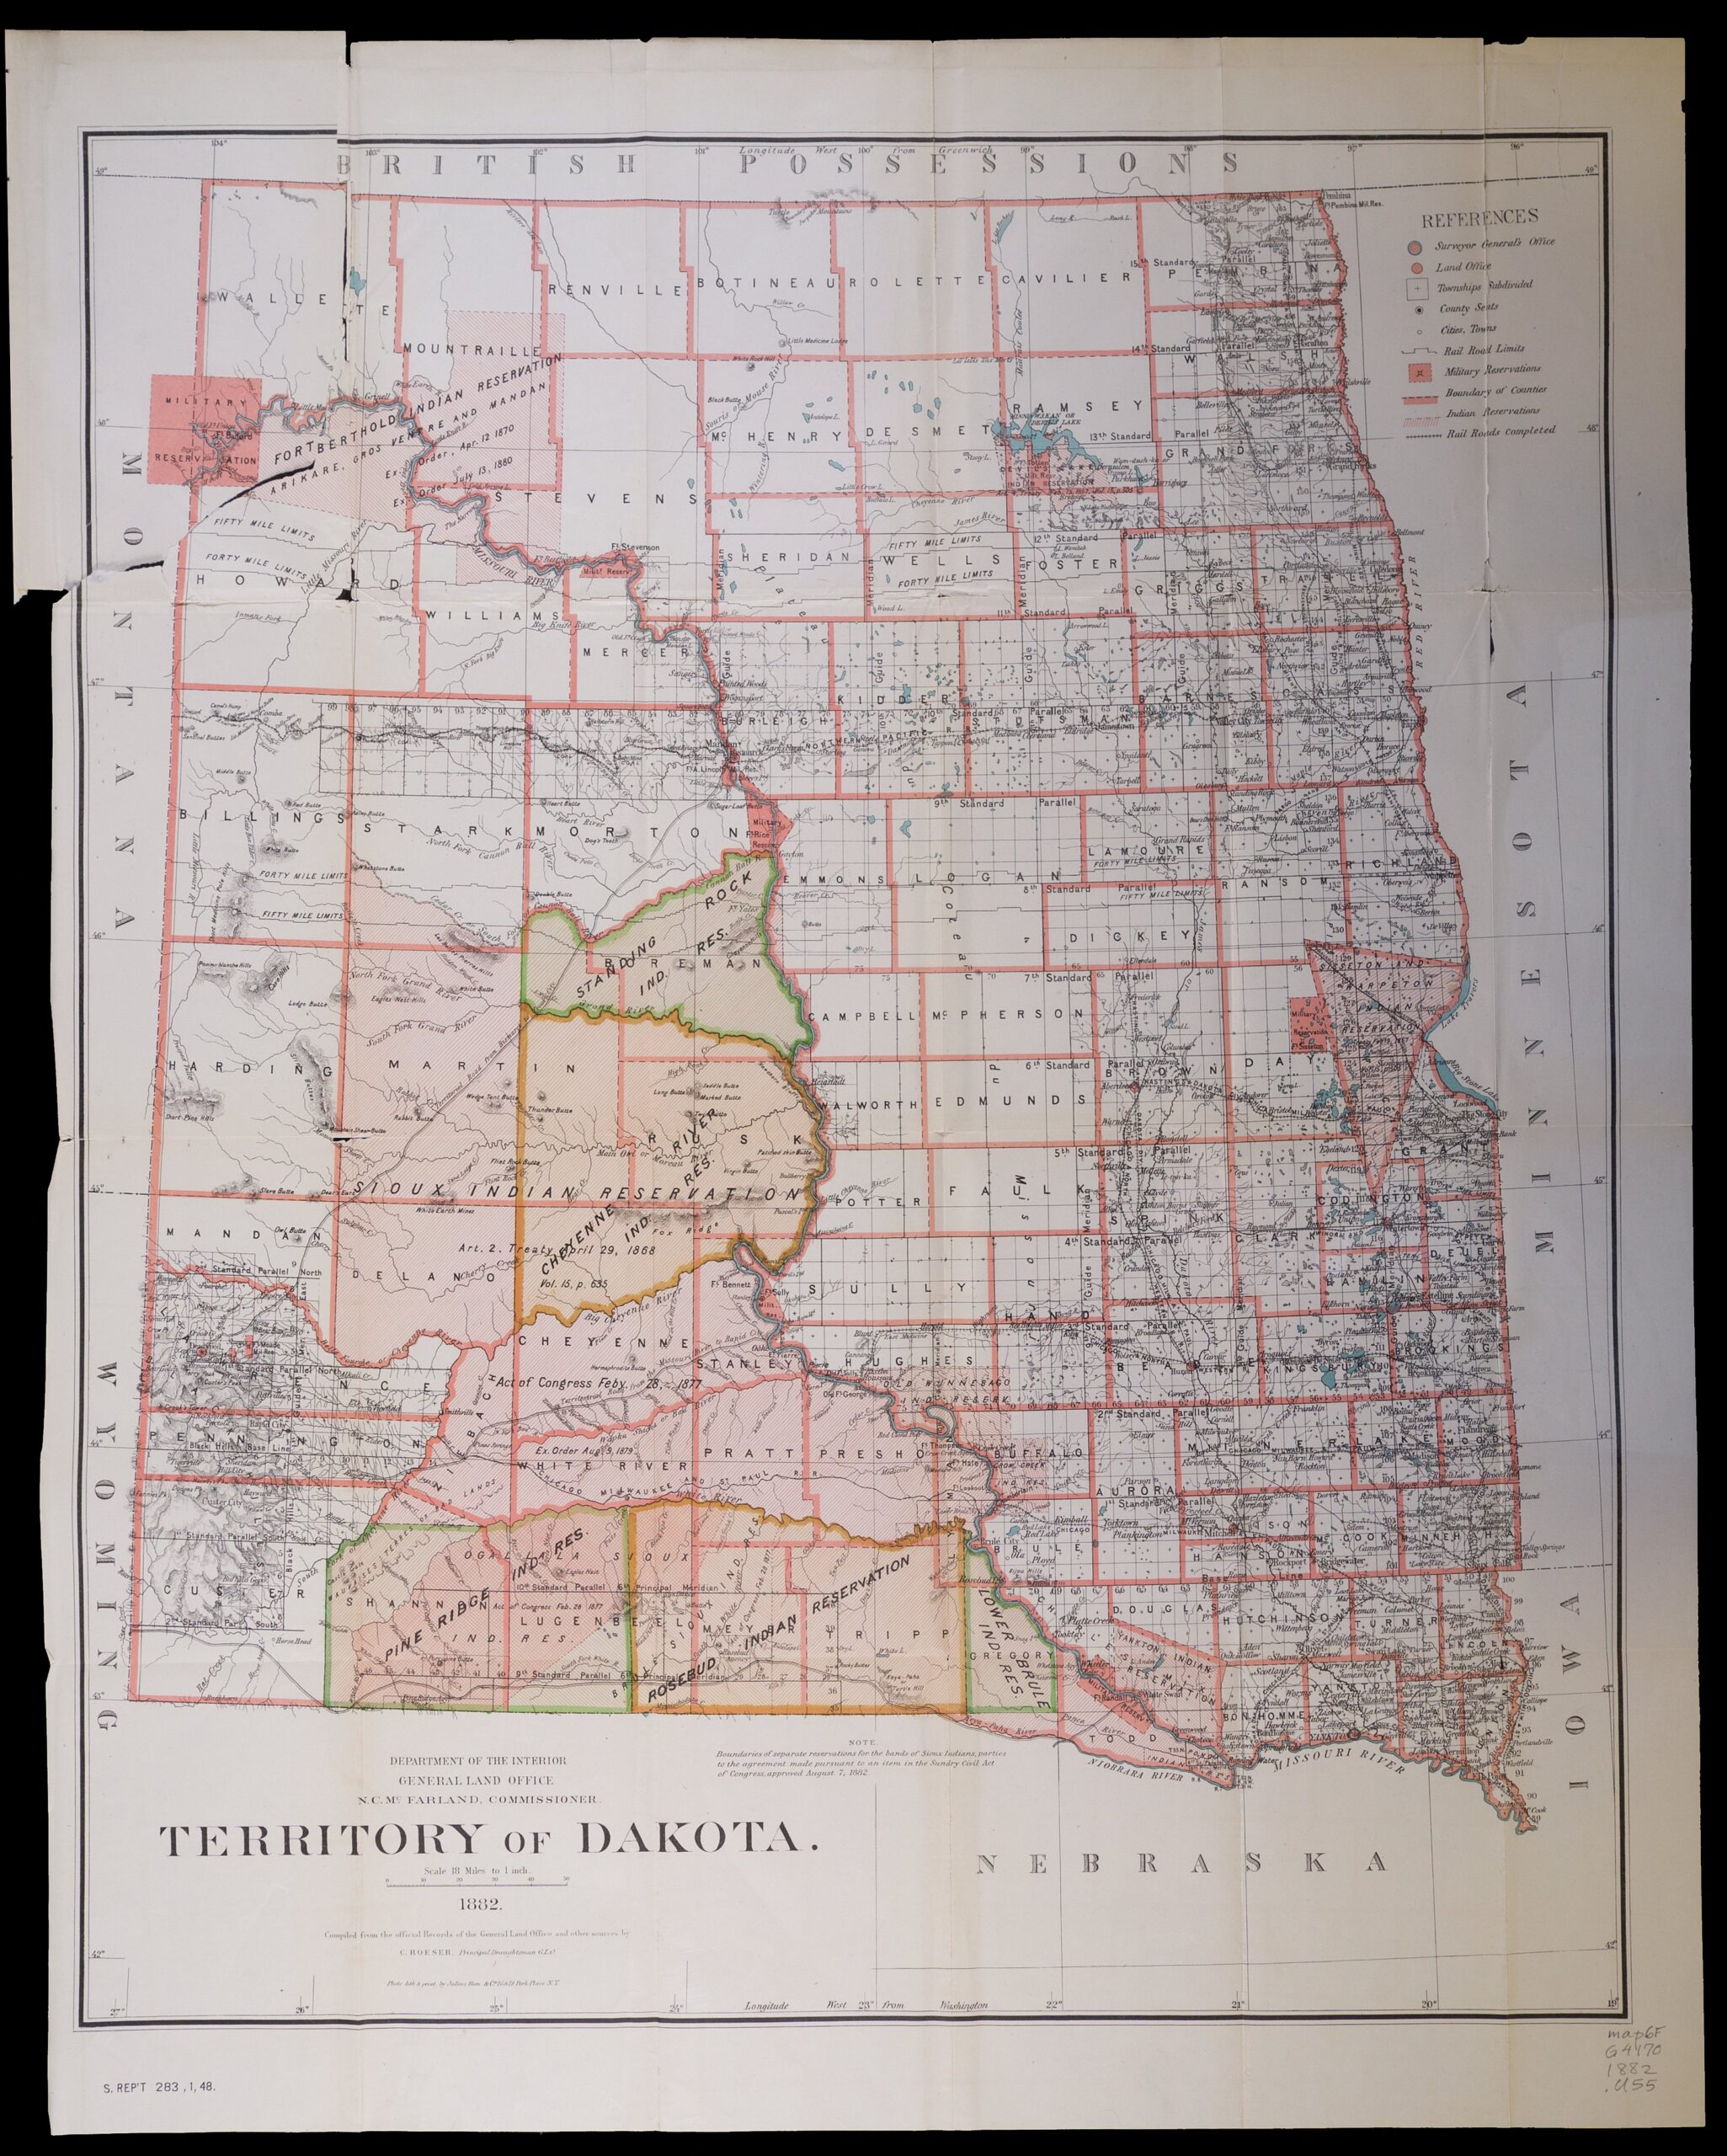 Map of the Dakota Territory indicating locations of various American Indian reservations